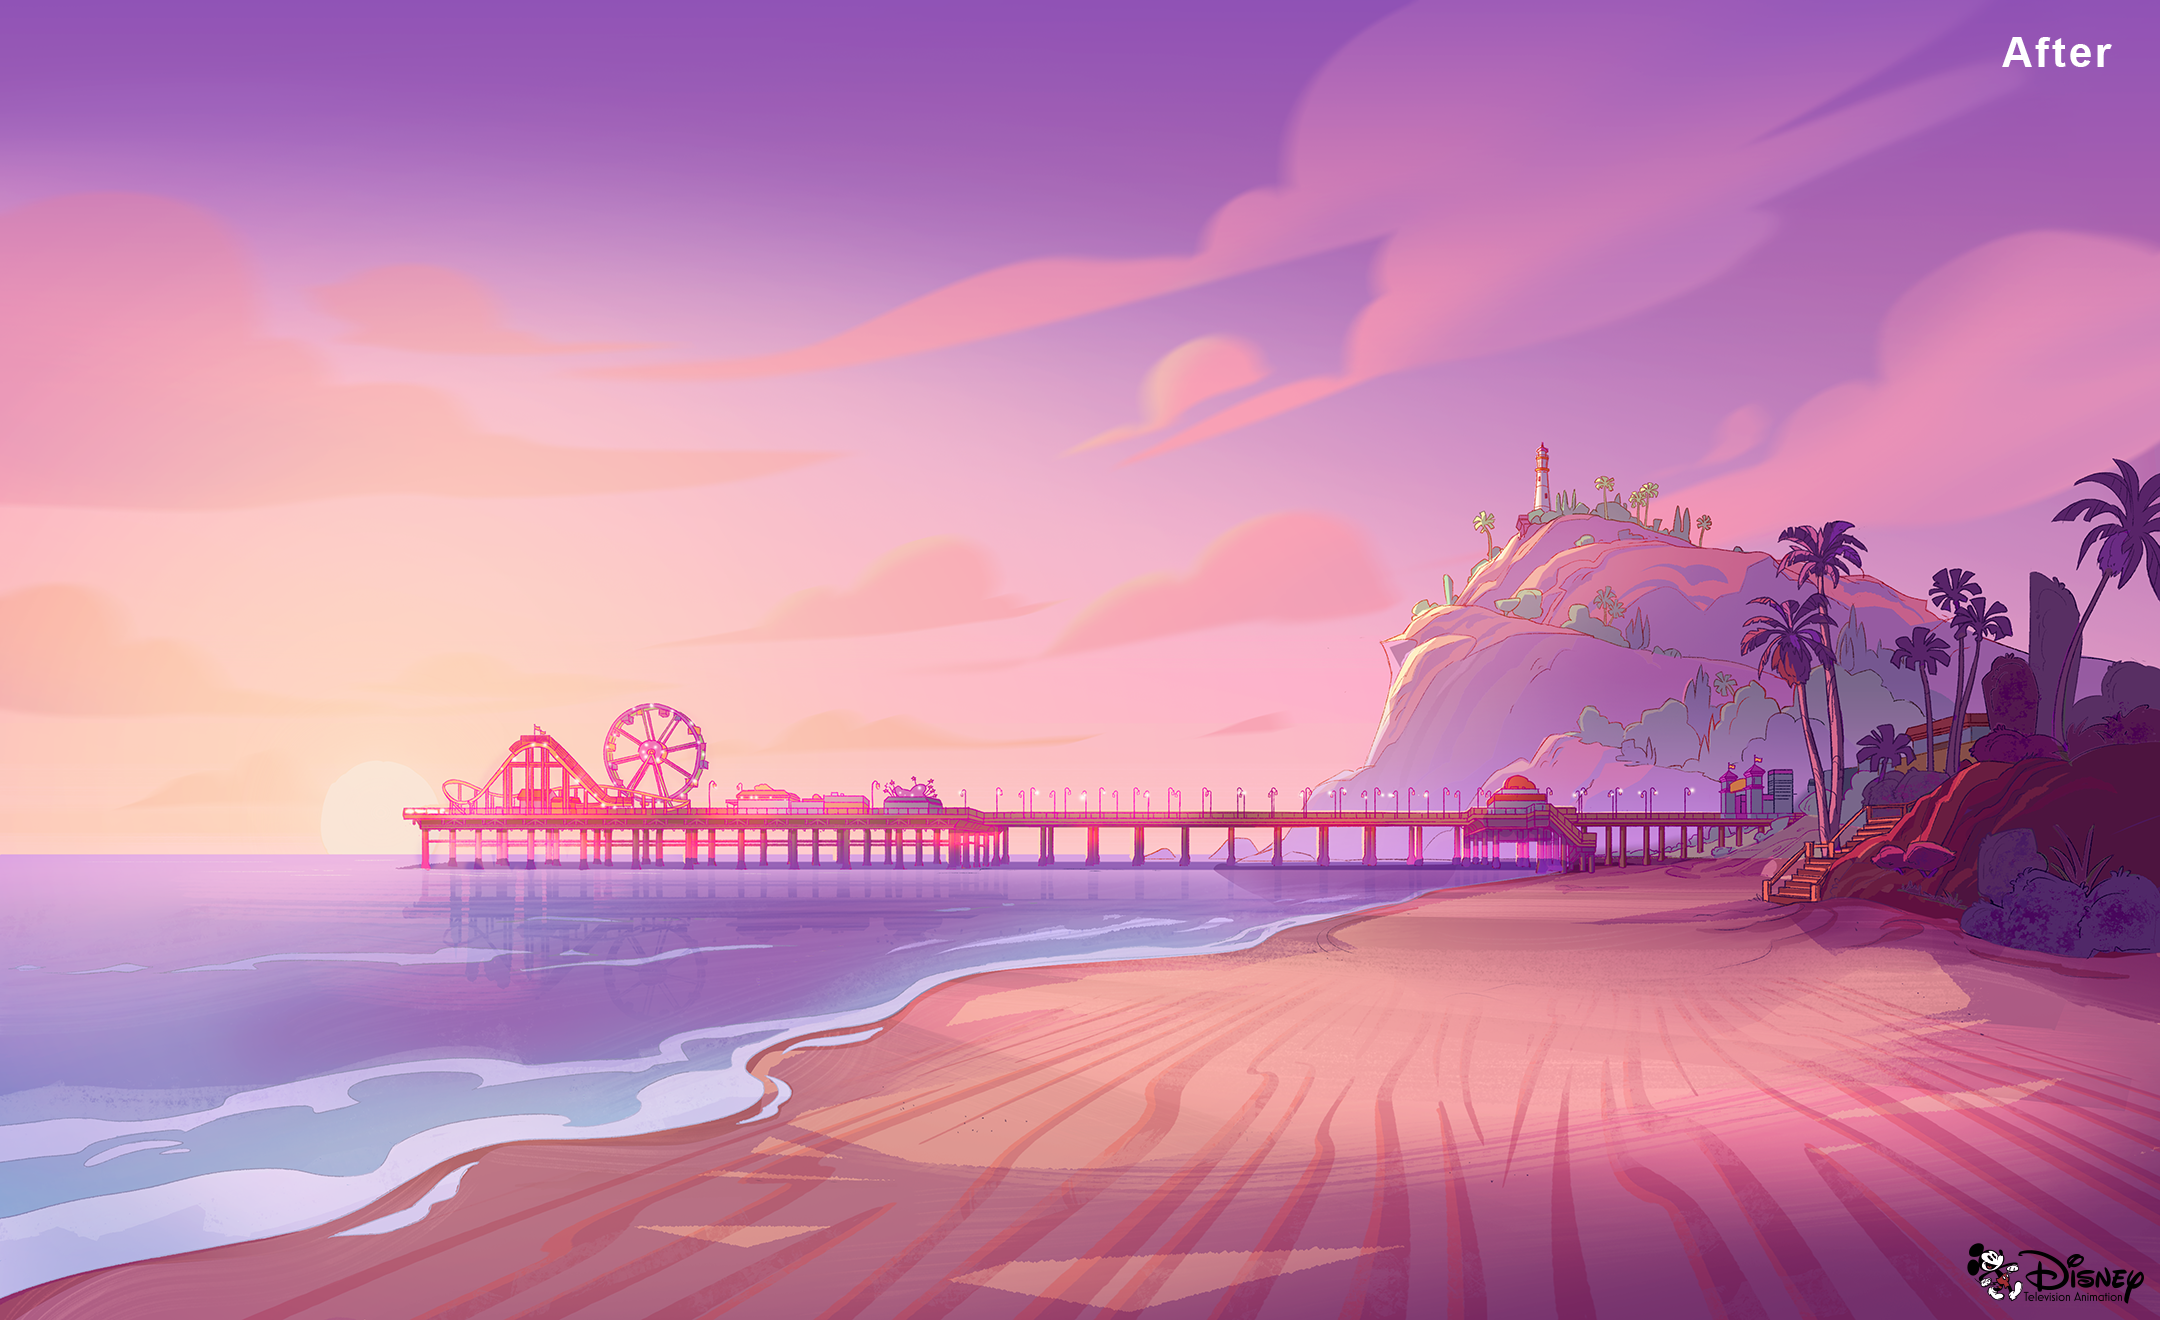 PIER BEACH AFTER small.png